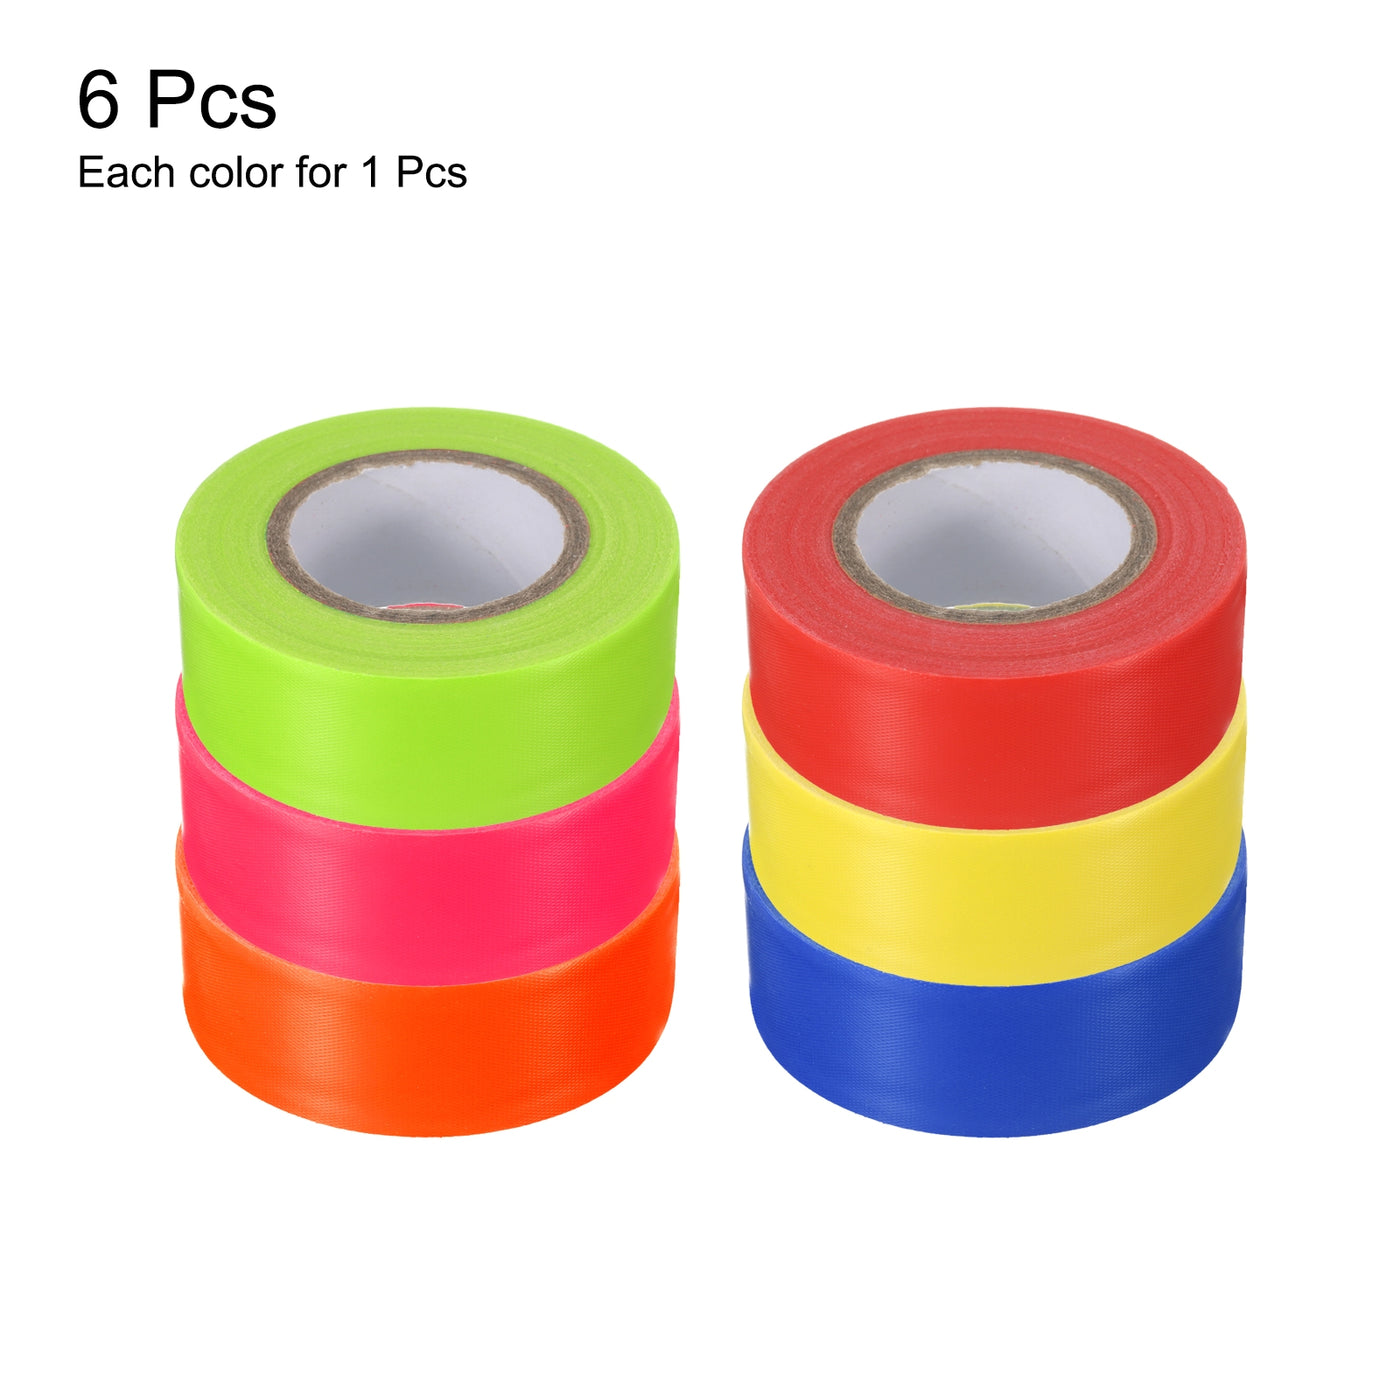 uxcell Uxcell PVC Flagging Tape 25mm x 30m/98.4ft Marking Tape Non-Adhesive 6pcs